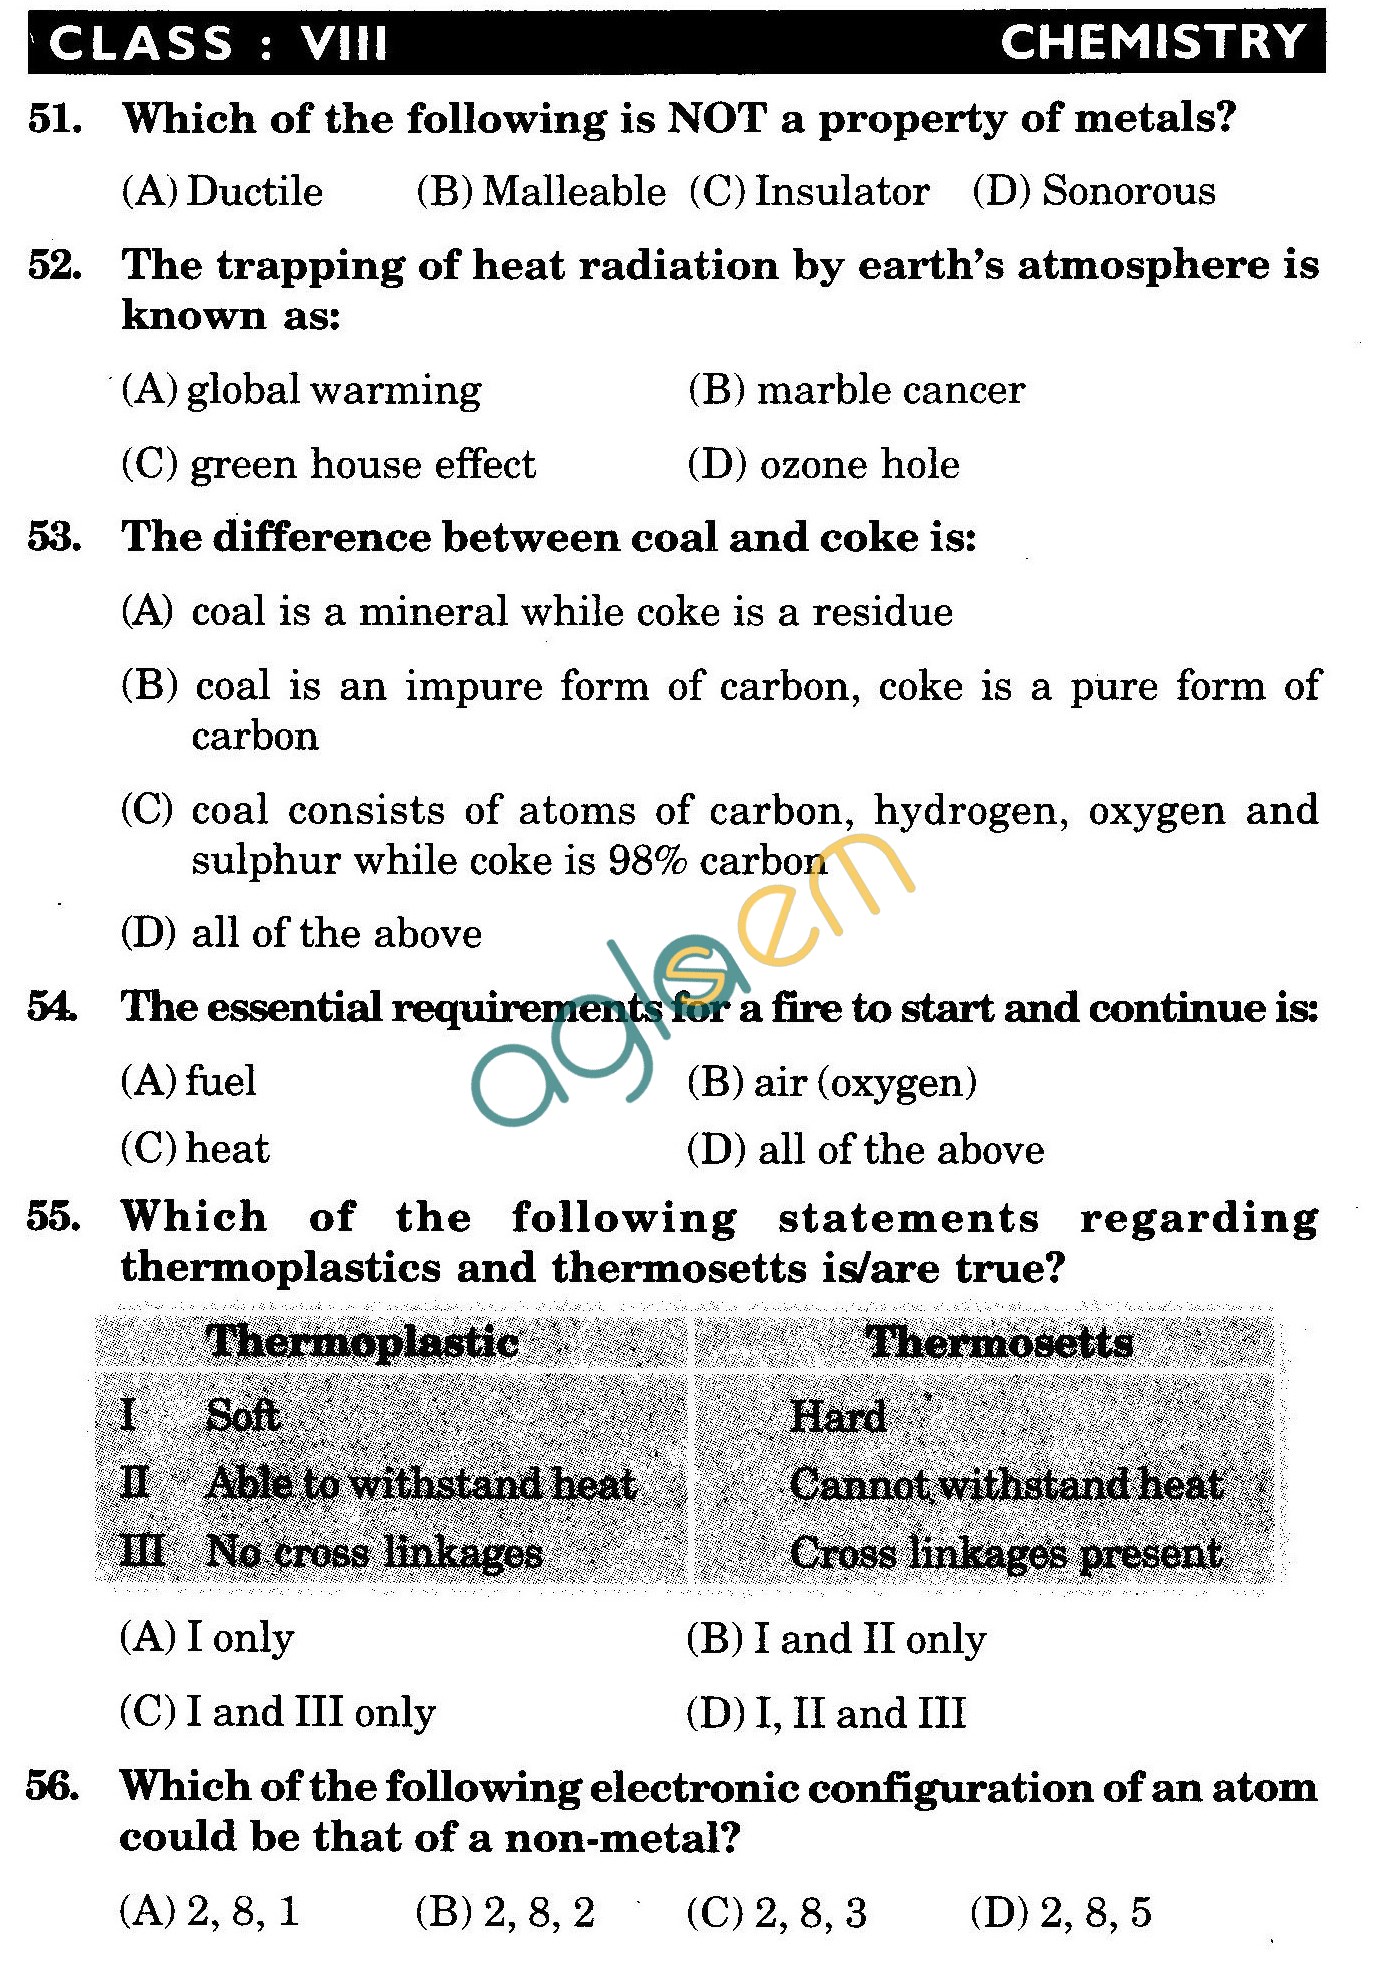 NSTSE 2009 Class VIII Question Paper with Answers - Chemistry